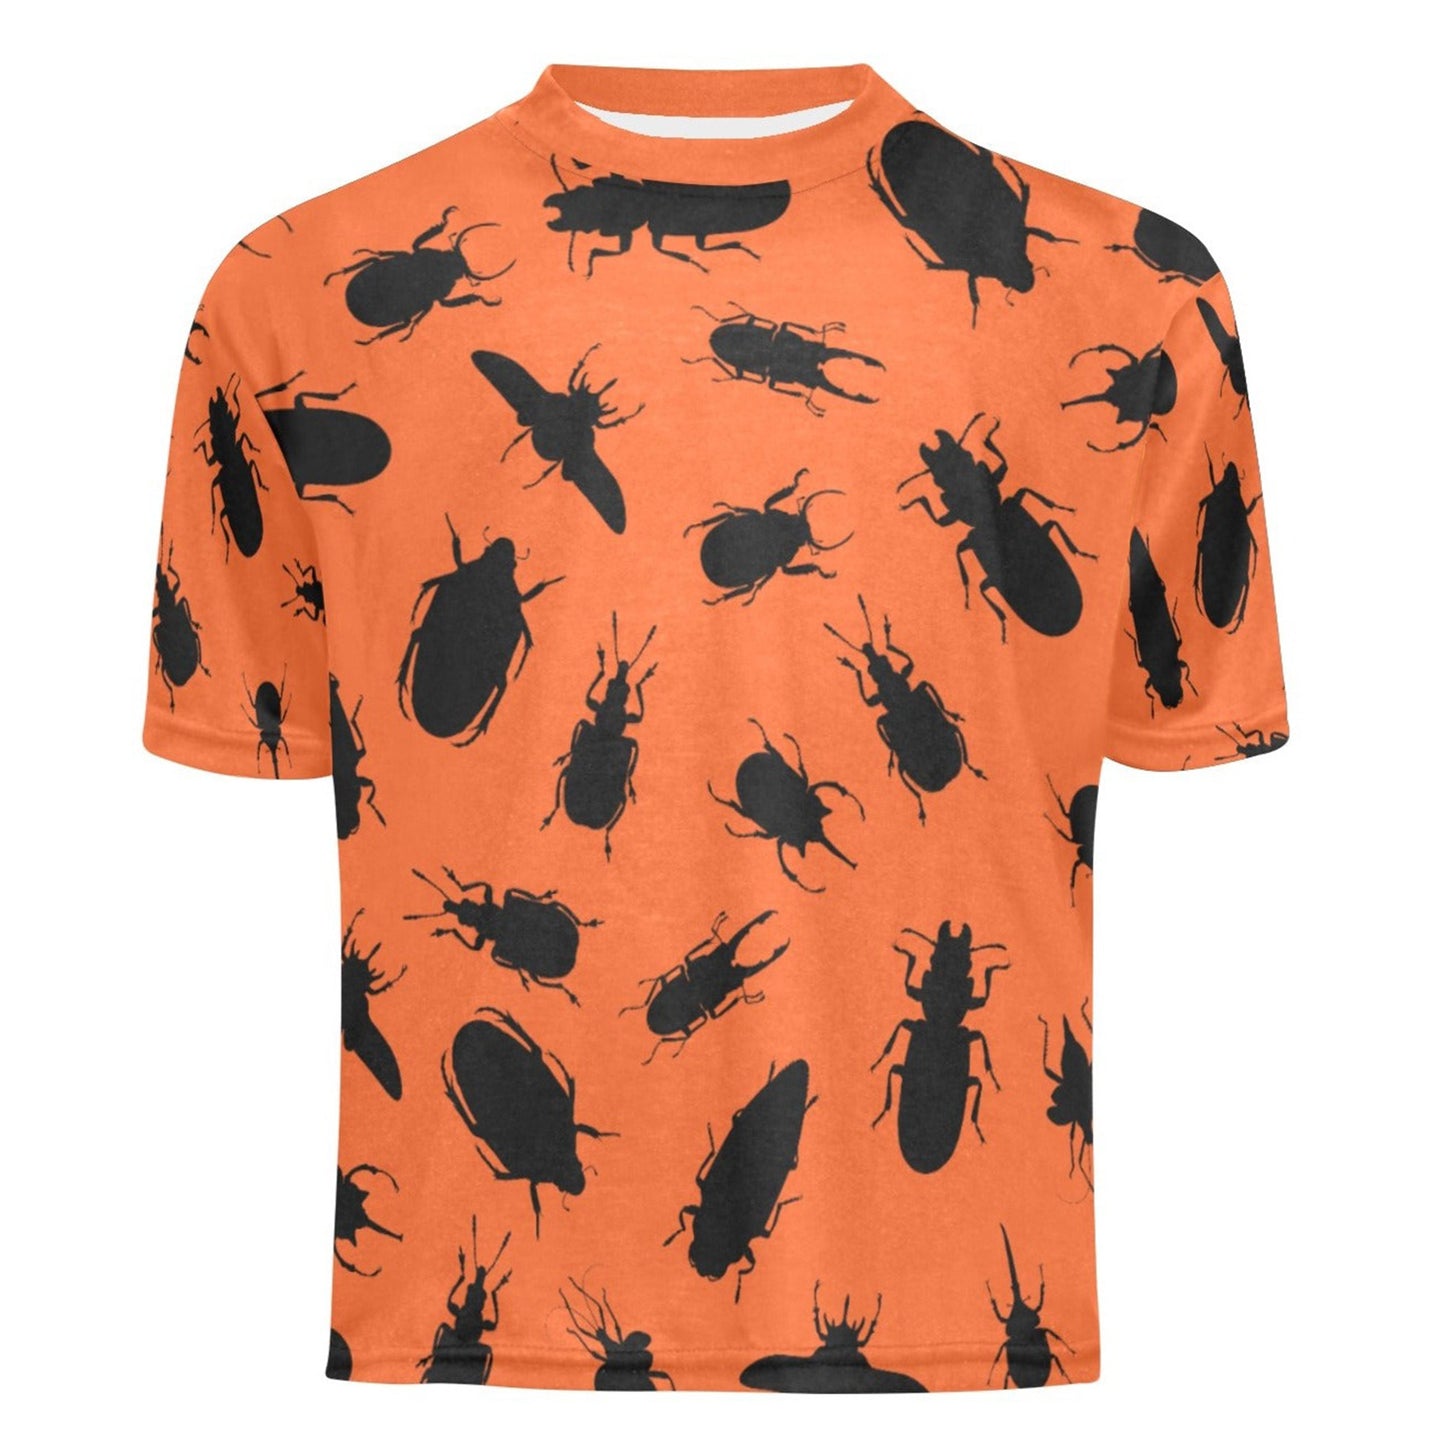 INSECTARIUM - Unisex All Over Print Kid's T-Shirt